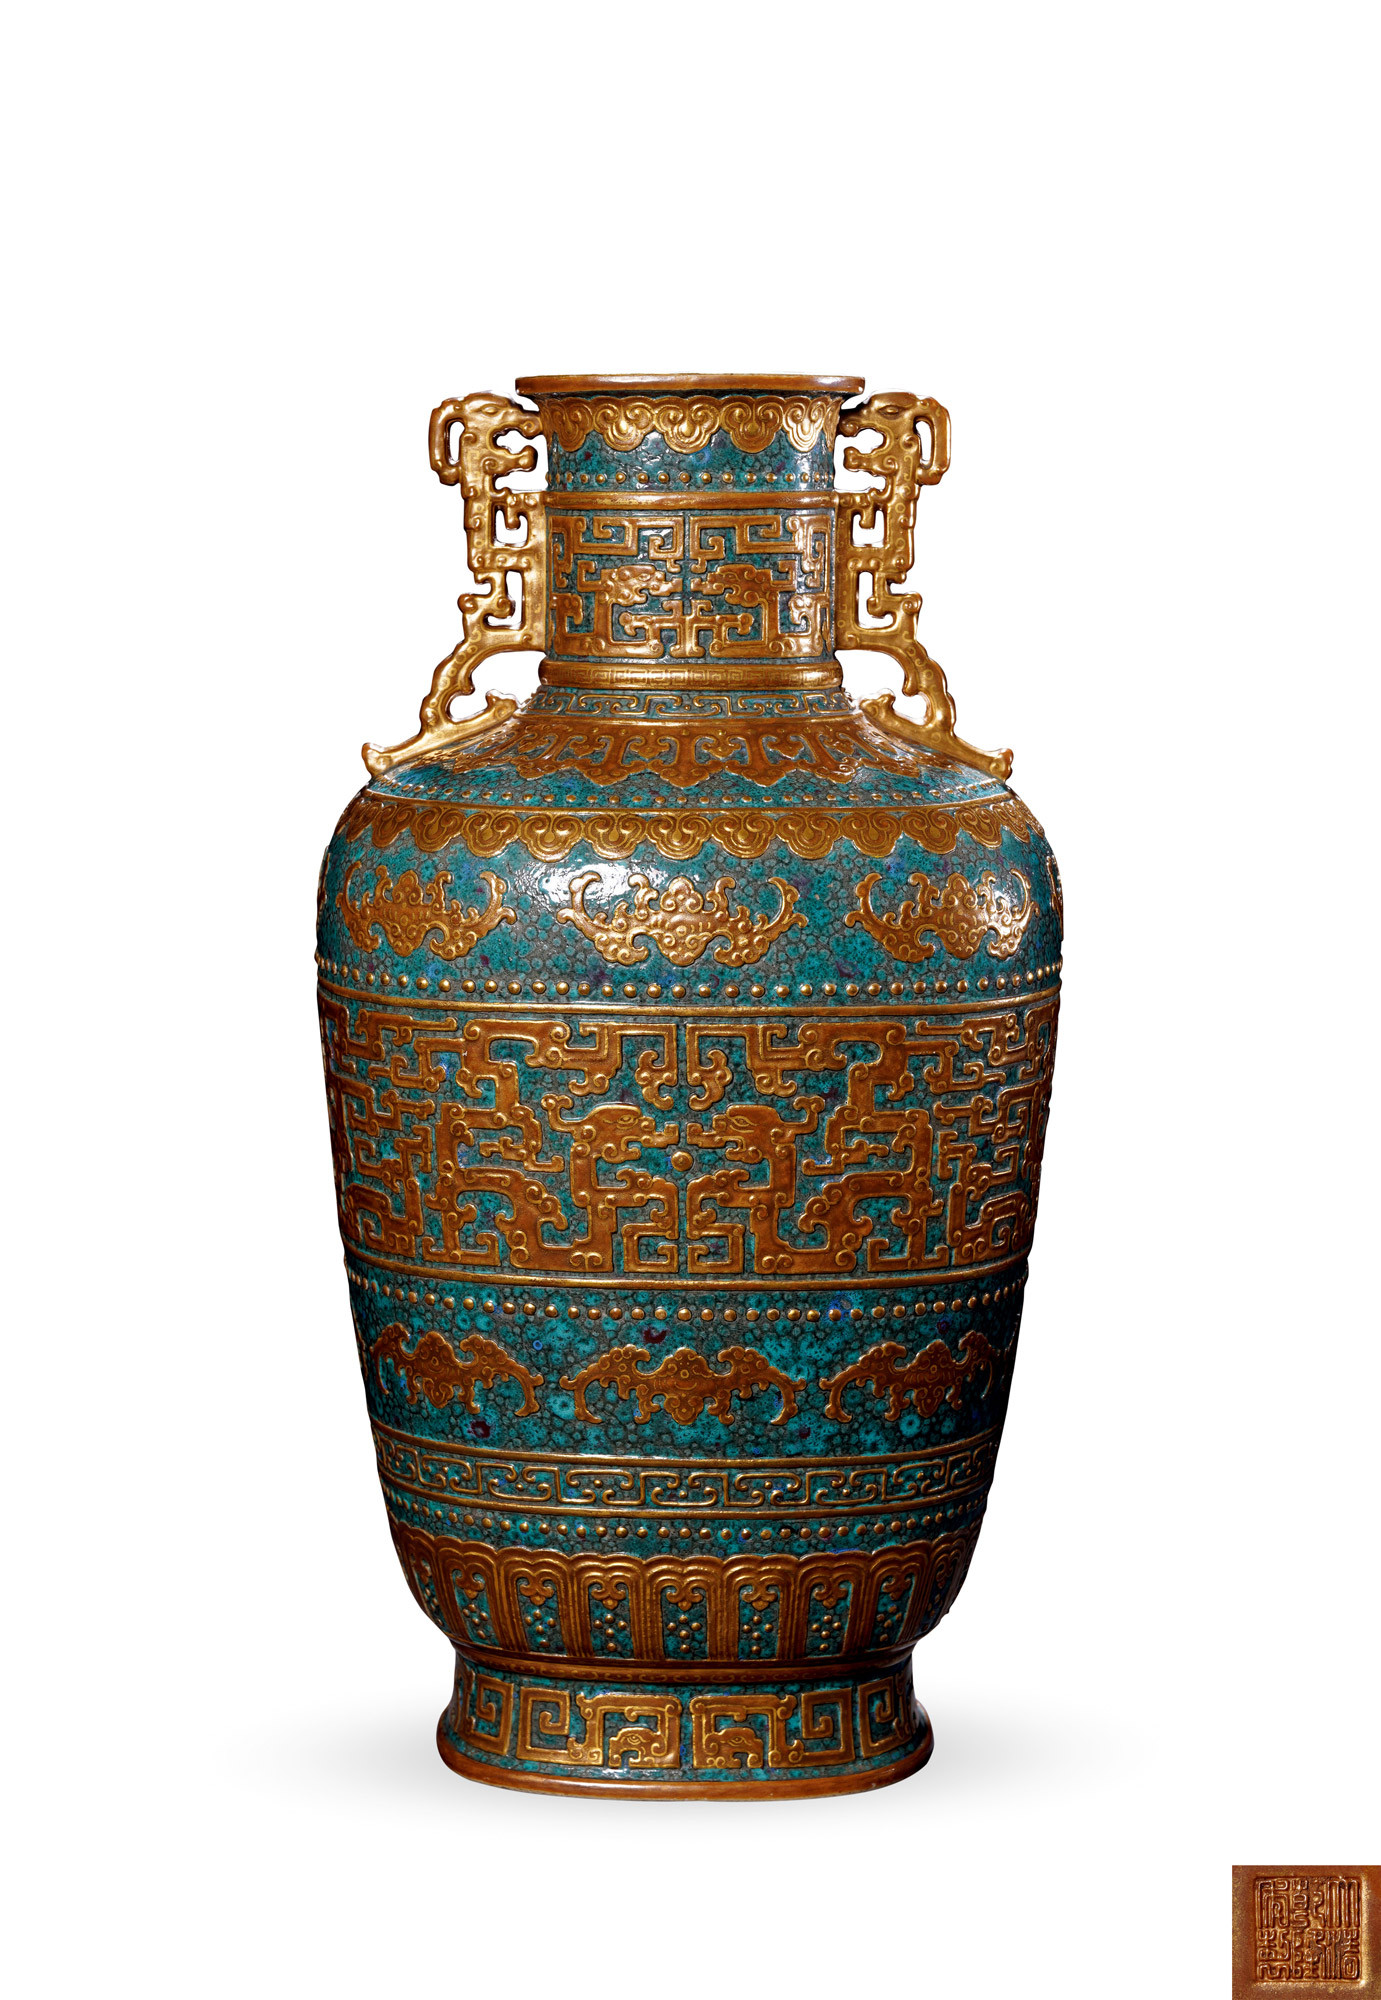 AN EXTREMELY RARE AND IMPORTANT IMPERIAL GILT-DECORATED‘KUI-DRAGON’VASE WITH CHI-DRAGON HANDLES